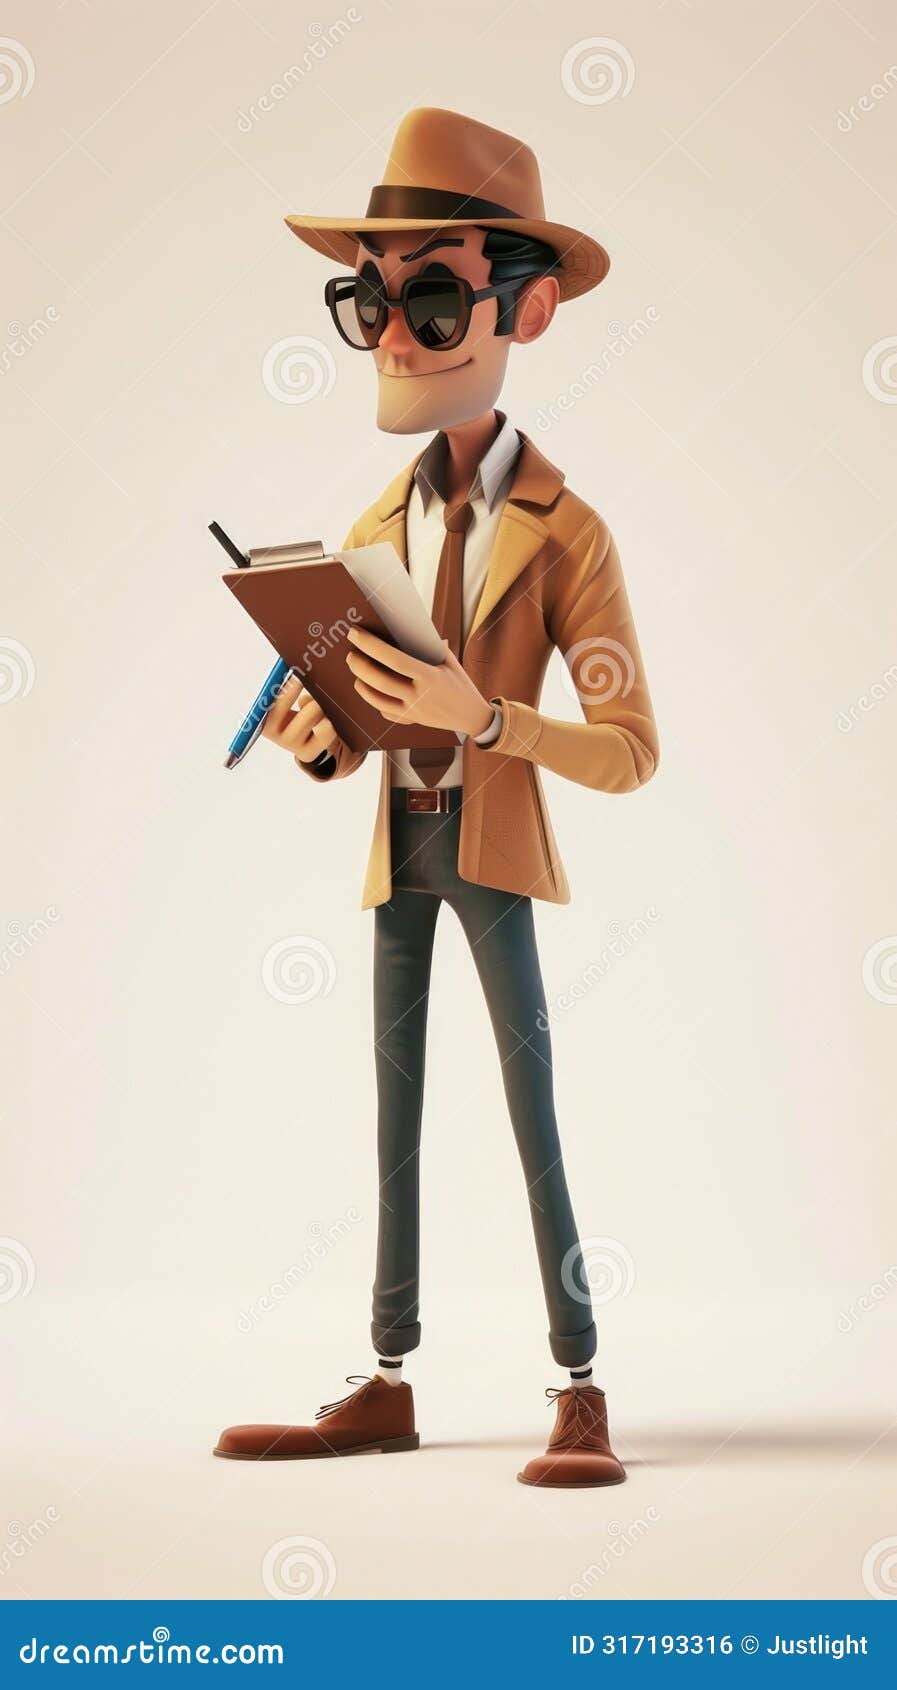 cartoon digital avatar of detective dynamo ready for action with a notepad and pencil, this avatar is dedicated to